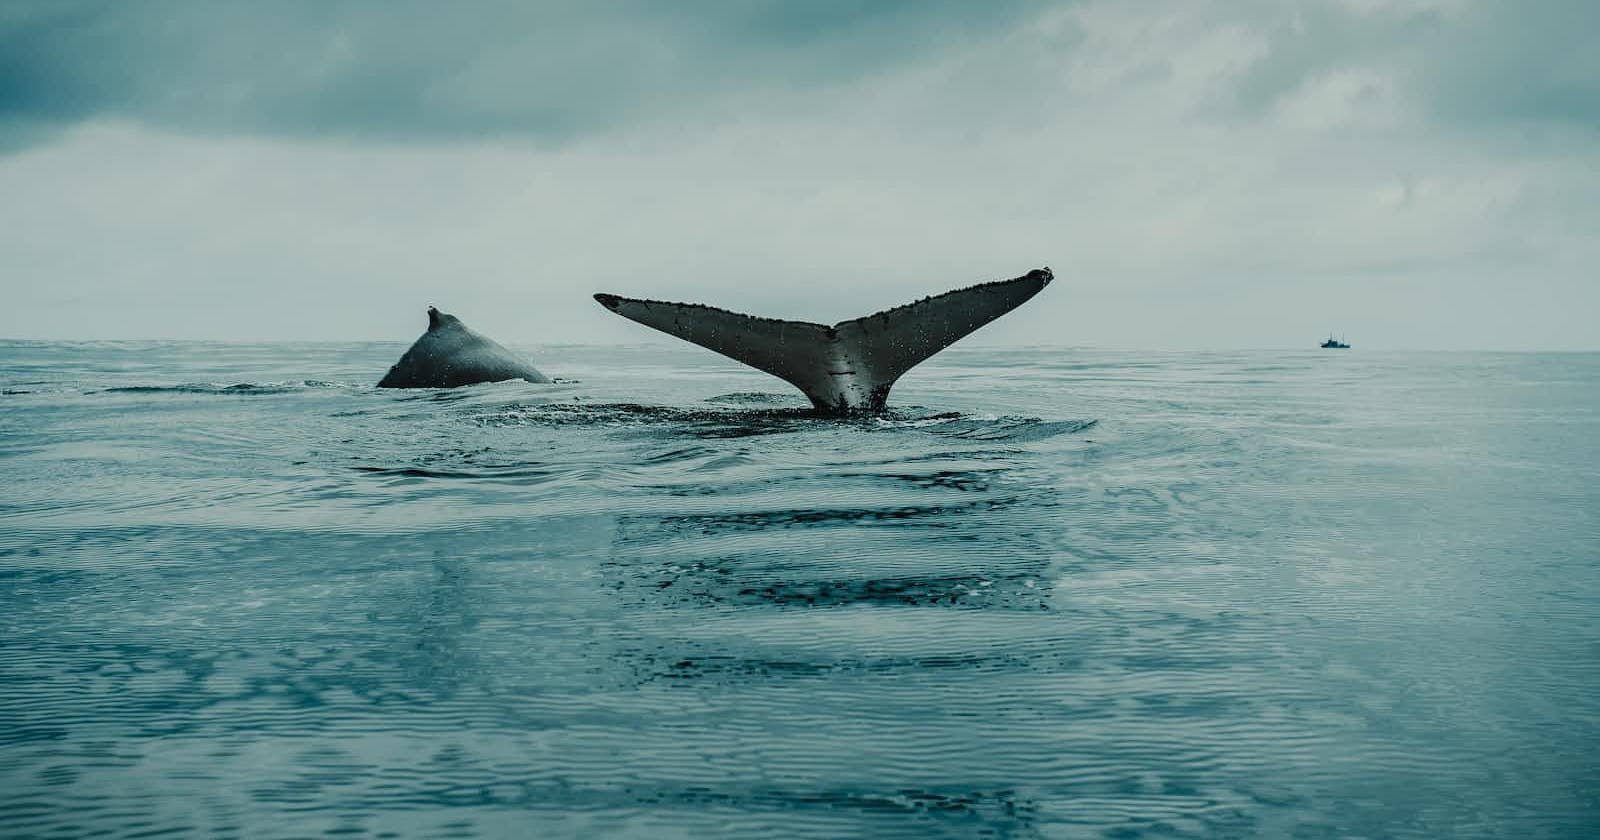 Taming the whale: introduction to Docker